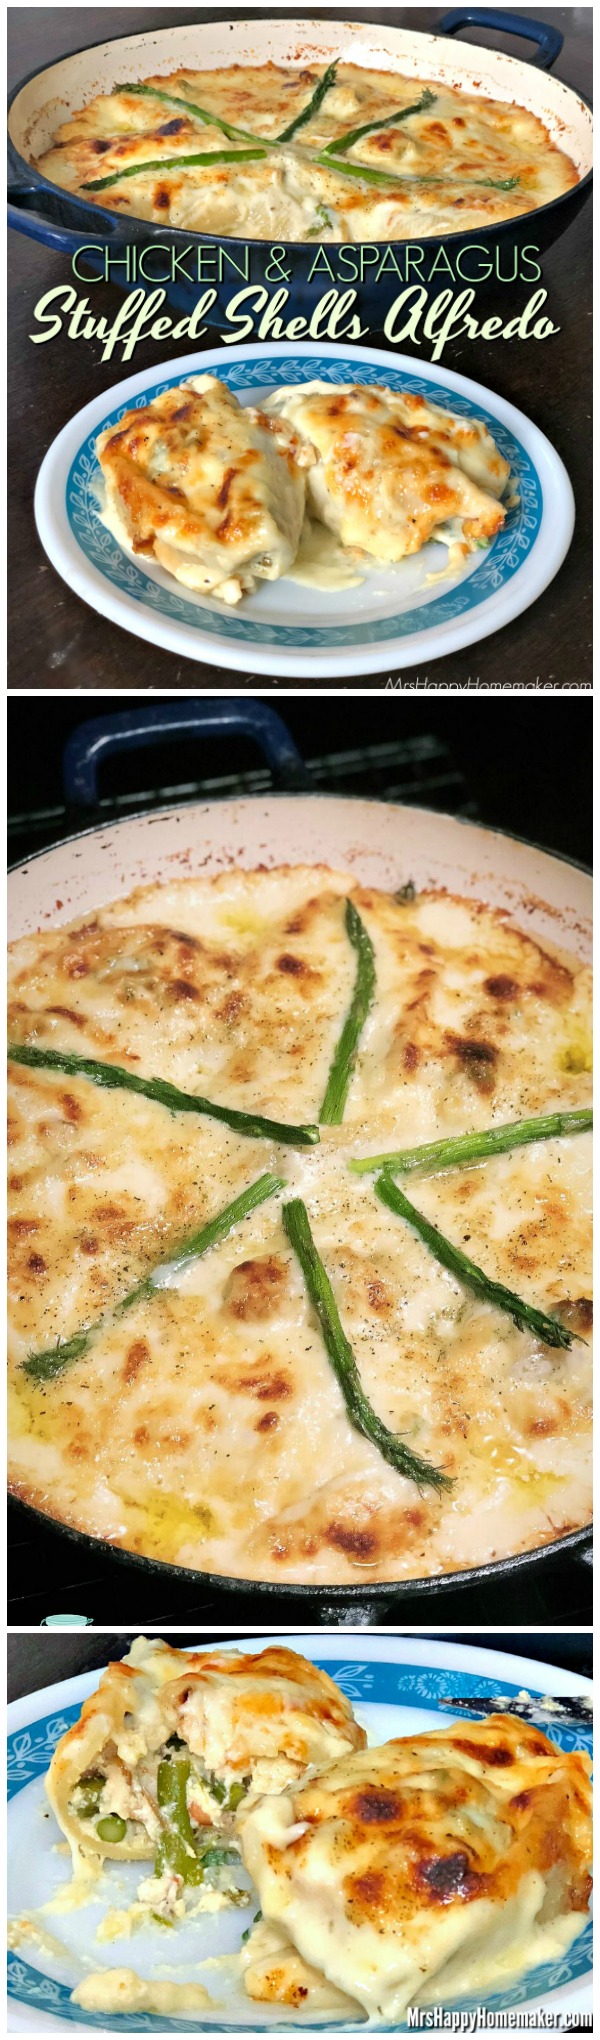 Chicken Asparagus Stuffed Shells Alfredo | Chicken & Asparagus mixed with a ricotta & mozzarella - stuffed in jumbo shells & baked with a simple homemade Alfredo